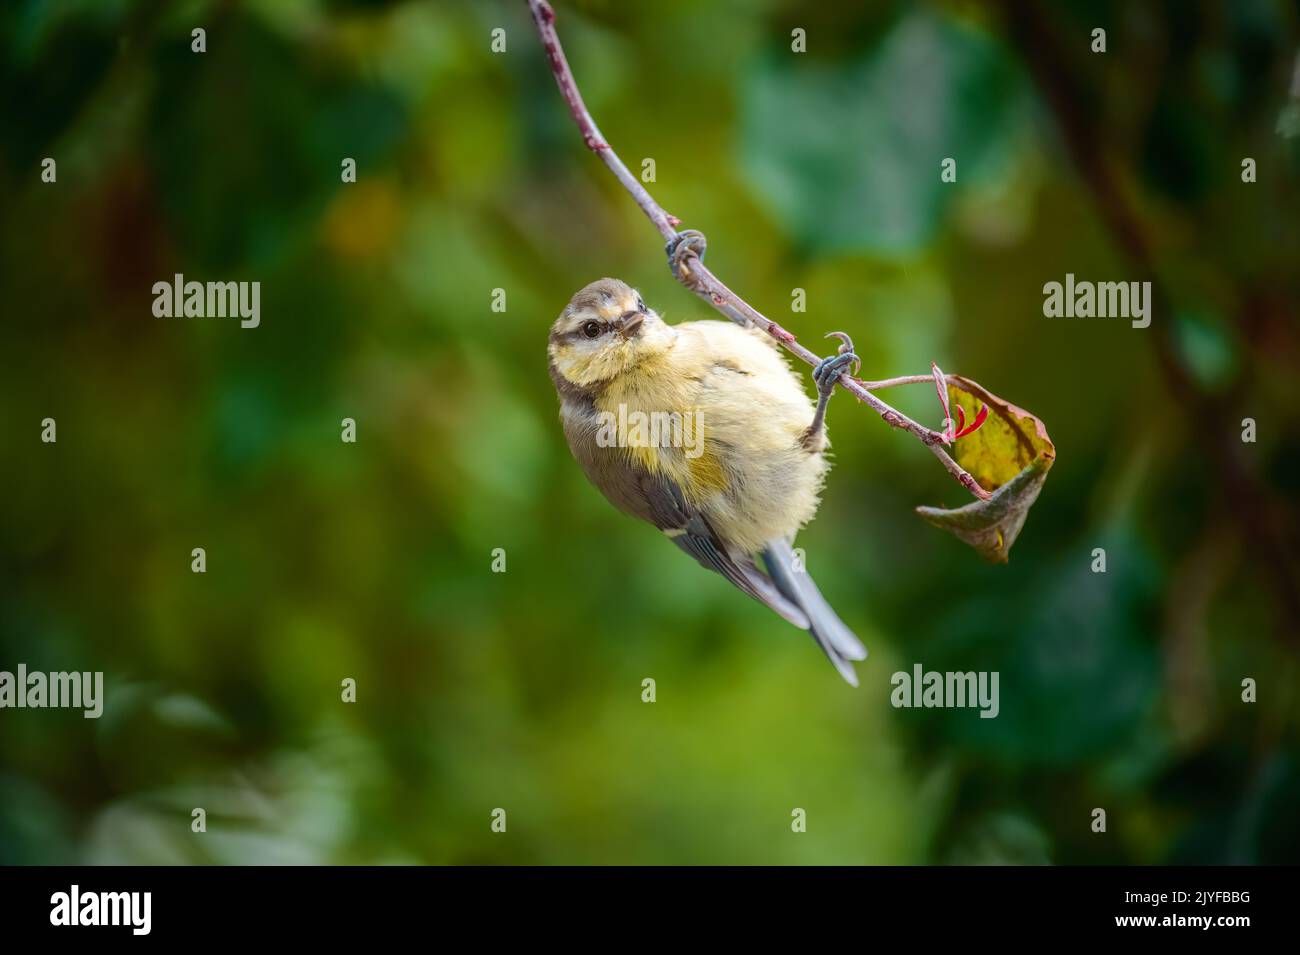 Blue tit bird hanging on the twig of a tree Stock Photo